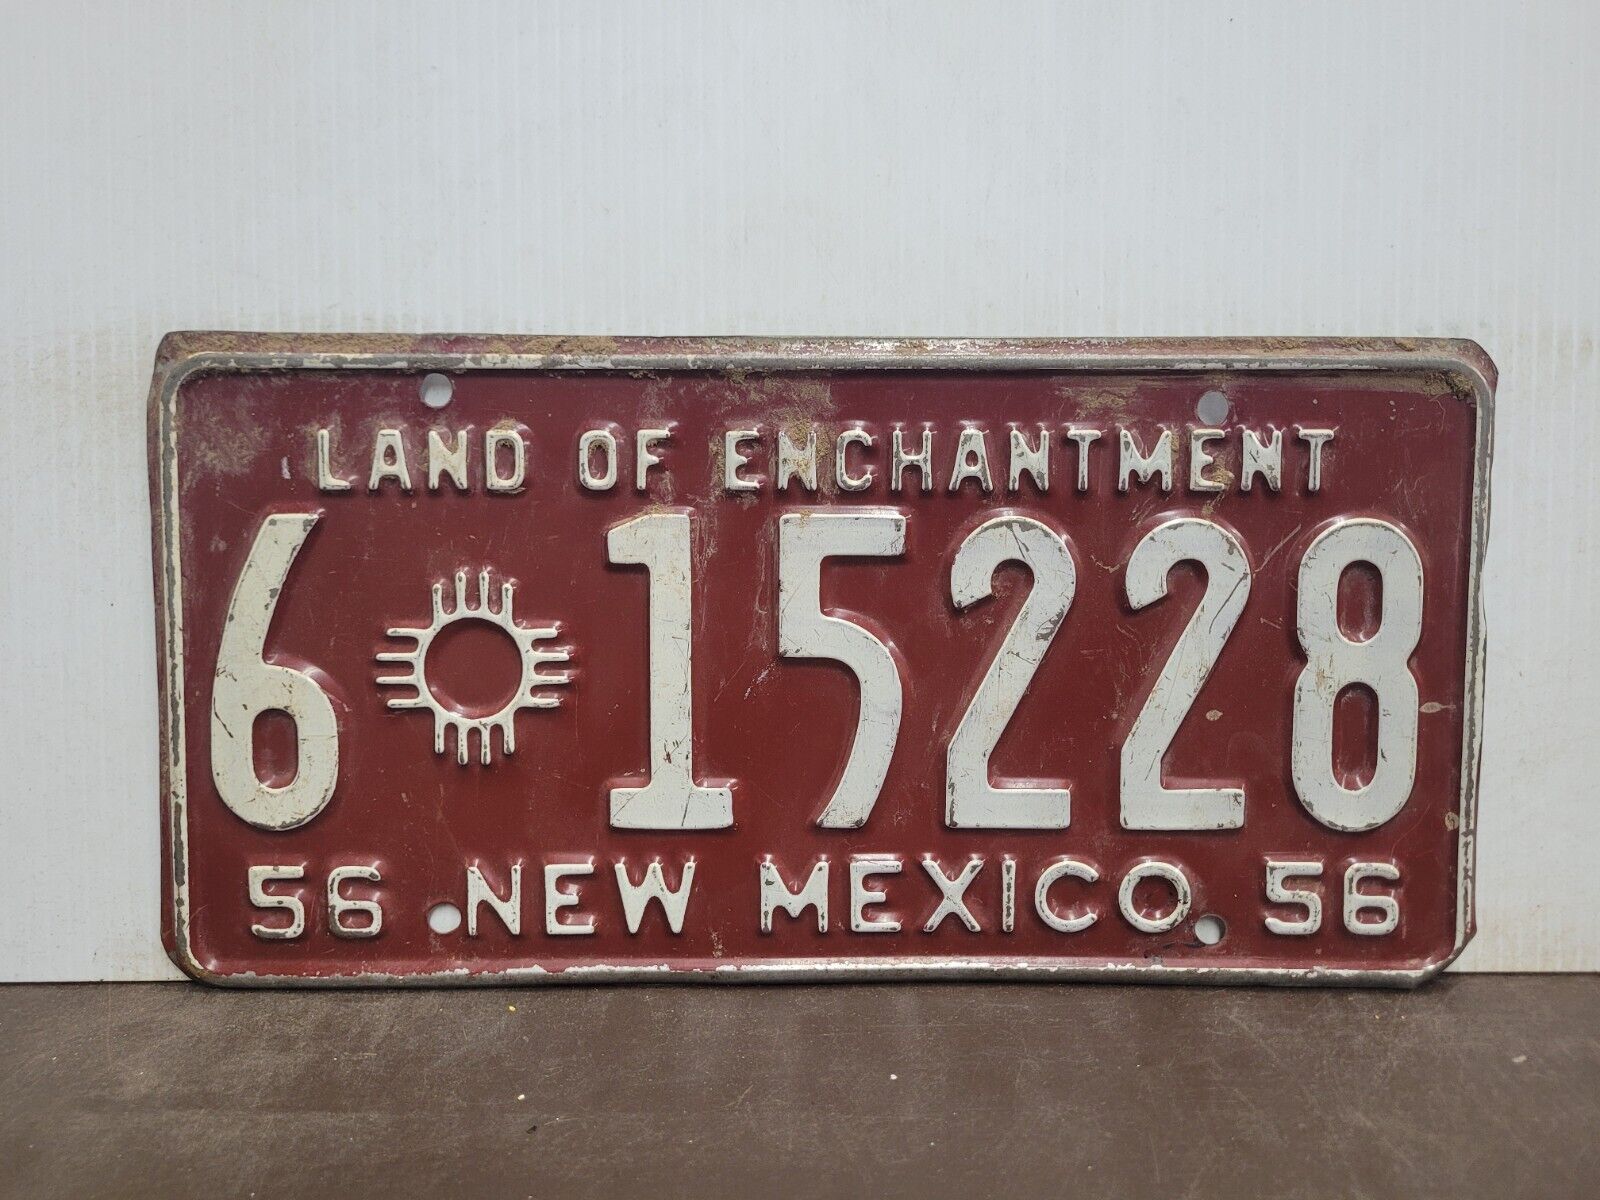 1956 New Mexico License Plate Tag